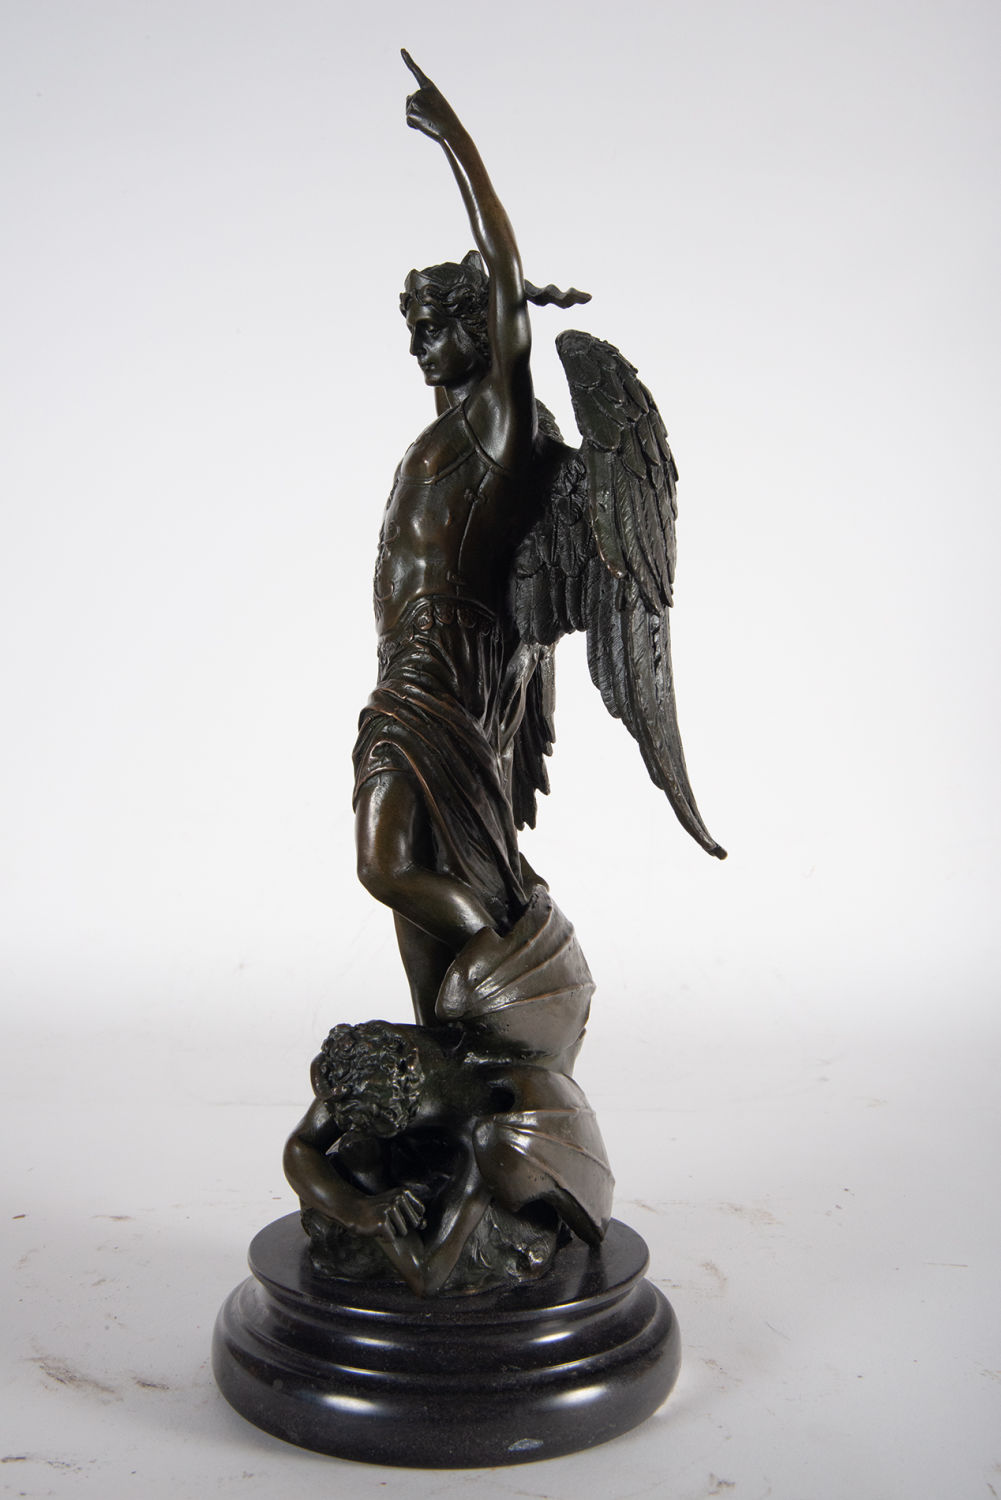 Saint Michael the Archangel Defeating the Evil One in patinated bronze, XIX - XX Centuries - Image 5 of 6